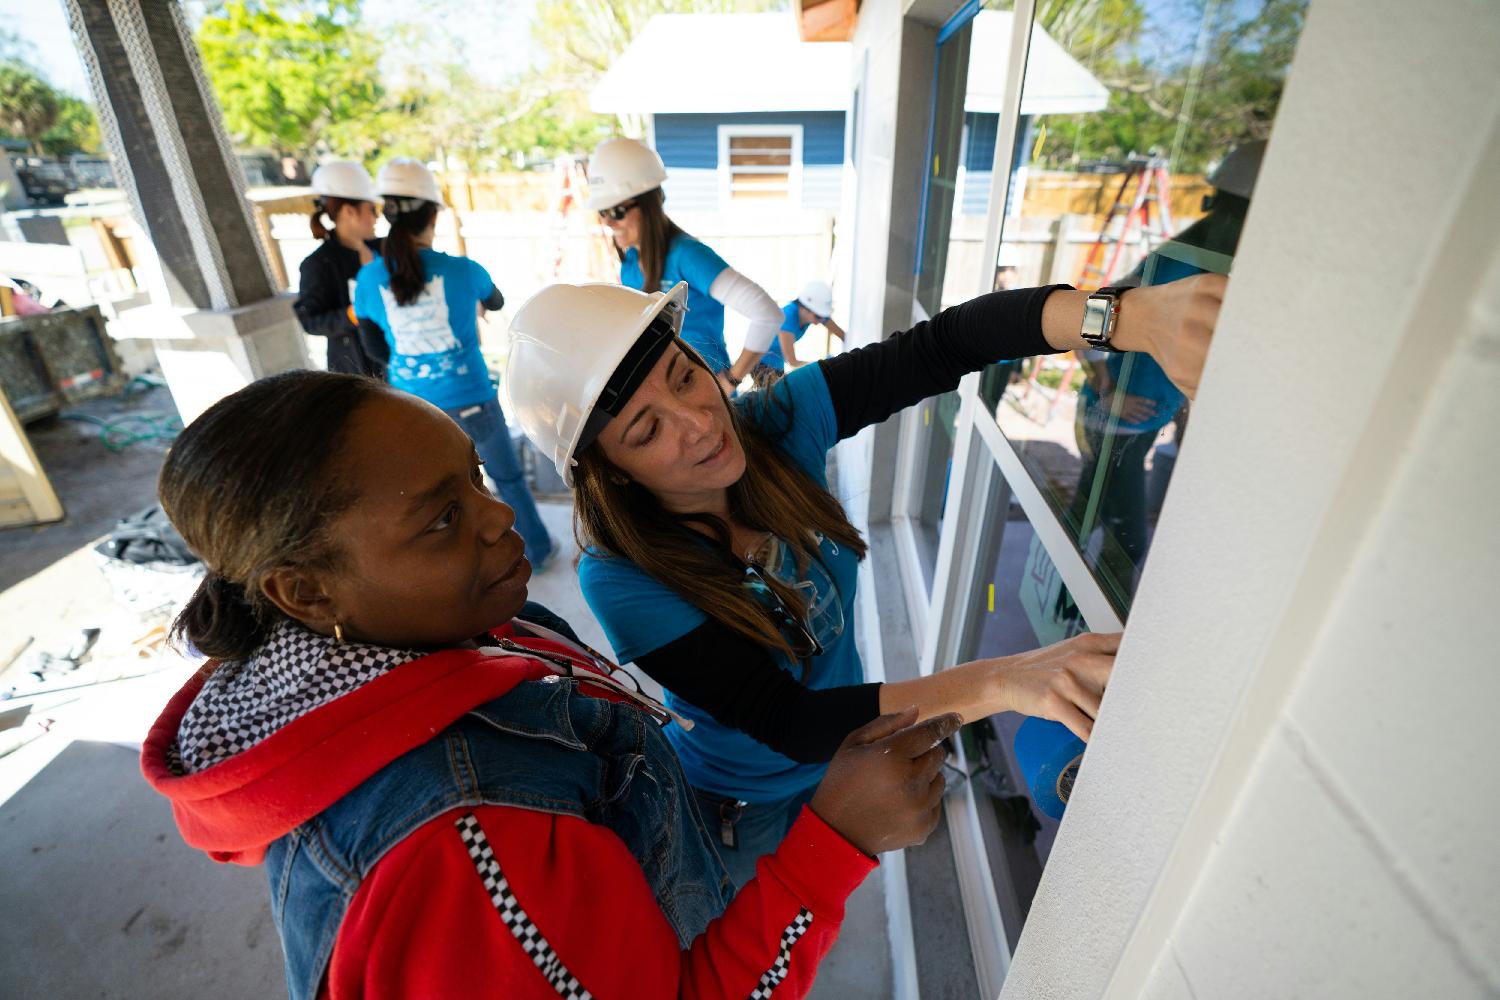 In early 2020, a cross-departmental group of strong PDI women participated in a local Habitat for Humanity build.